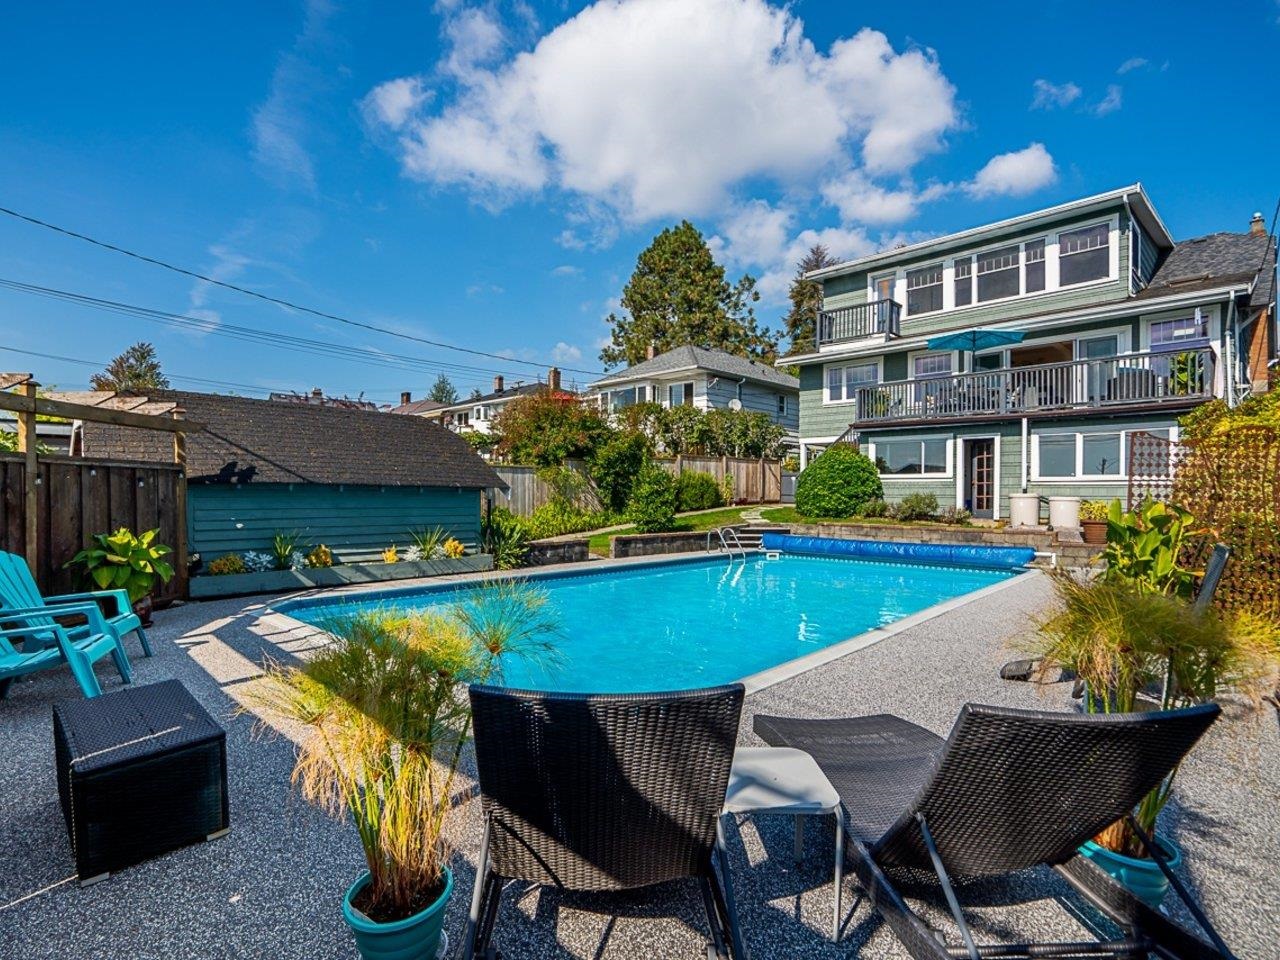 Amazing sundrenched rear garden pool & patio. Stunning panoramic views.